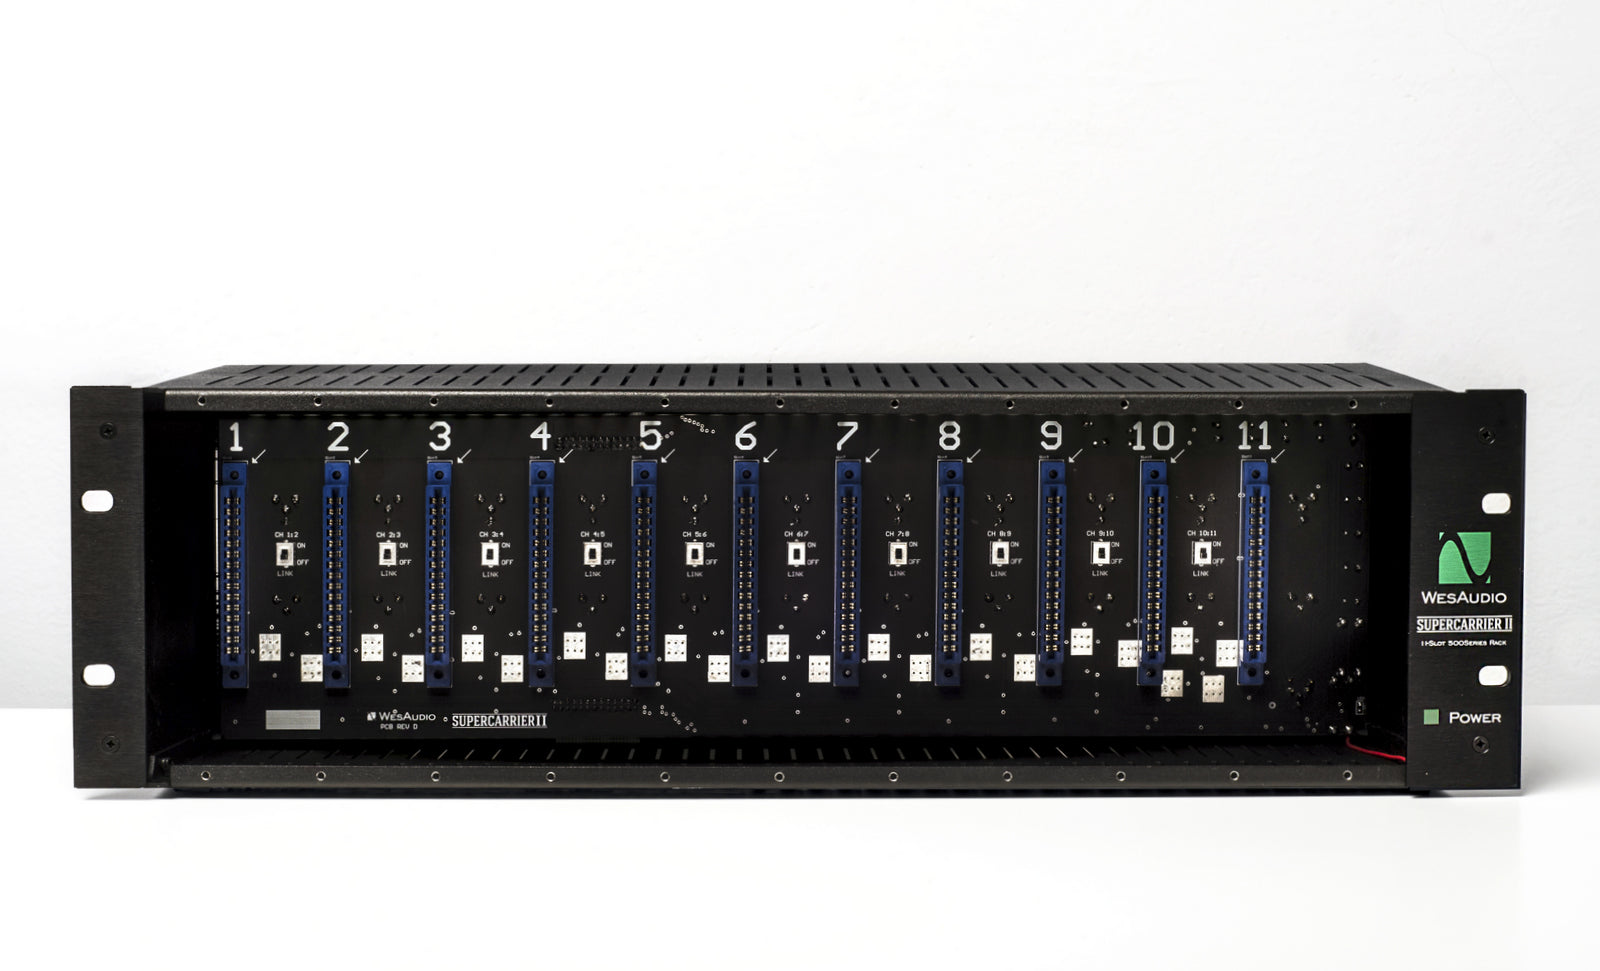 WesAudio | Supercarrier II 1 Slots 500 Series Chassis